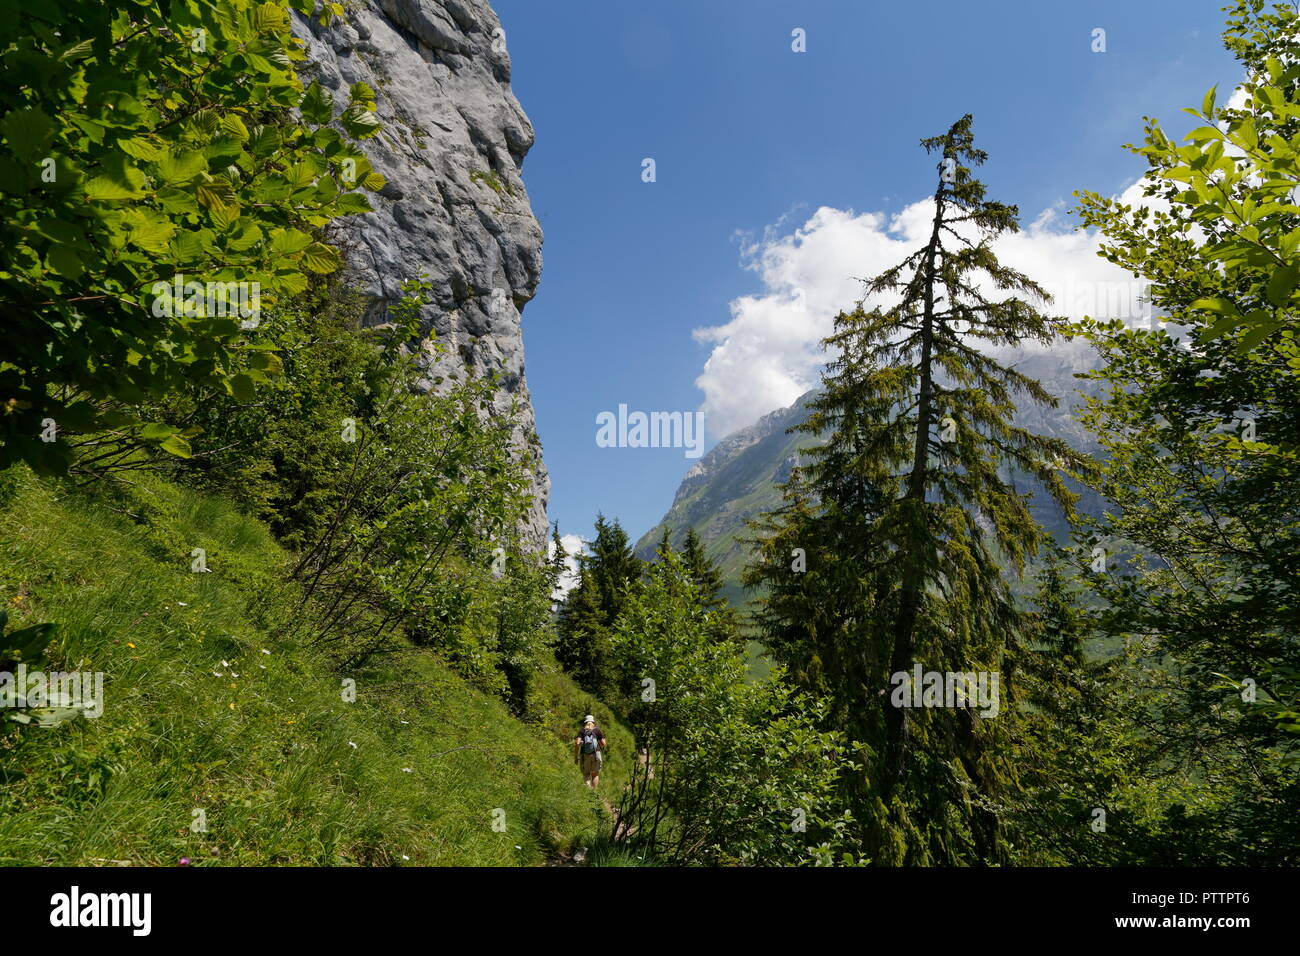 Landscape view with a female hiker on a footpath trail through forests and mountains around Col de la Forclaz France Stock Photo